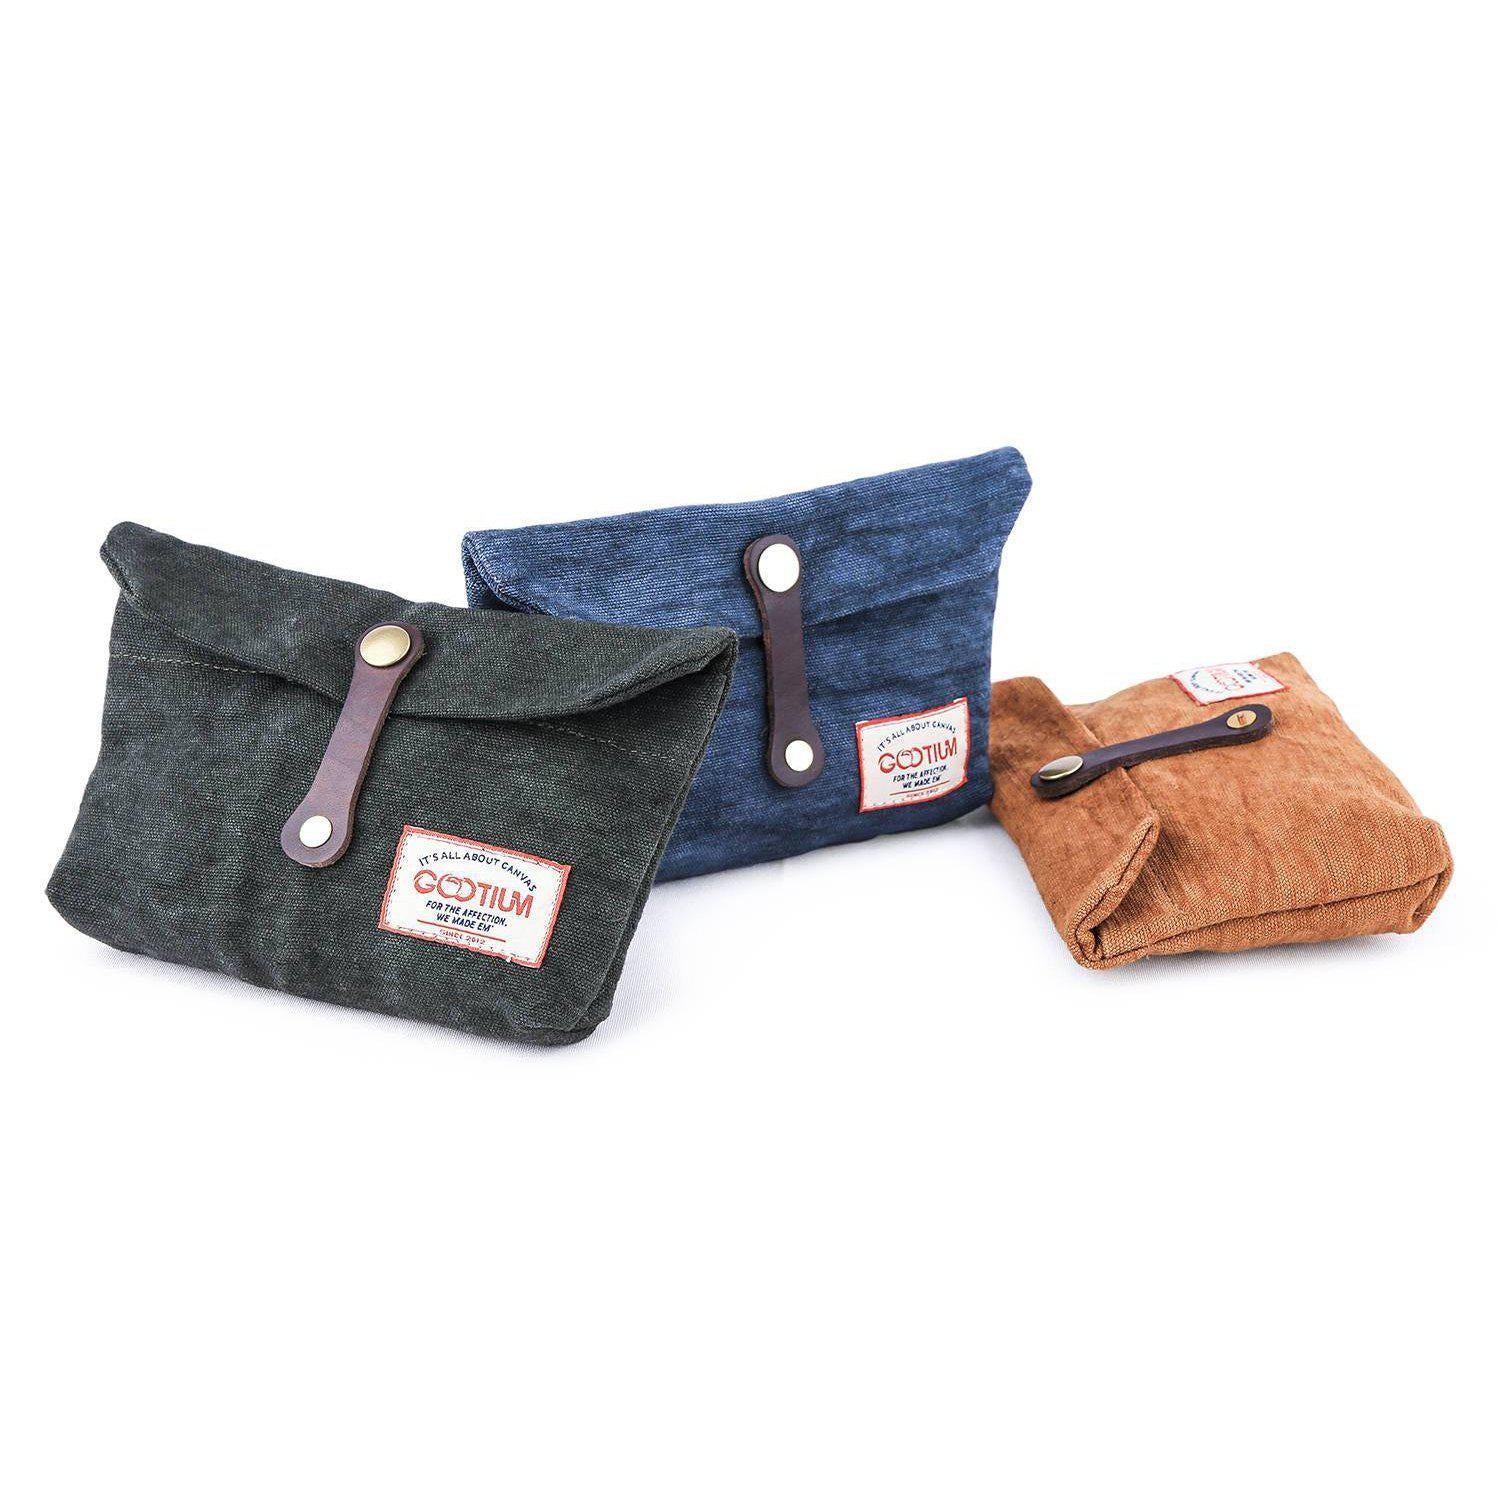 Purse and wallet as small pouch for carrying coins